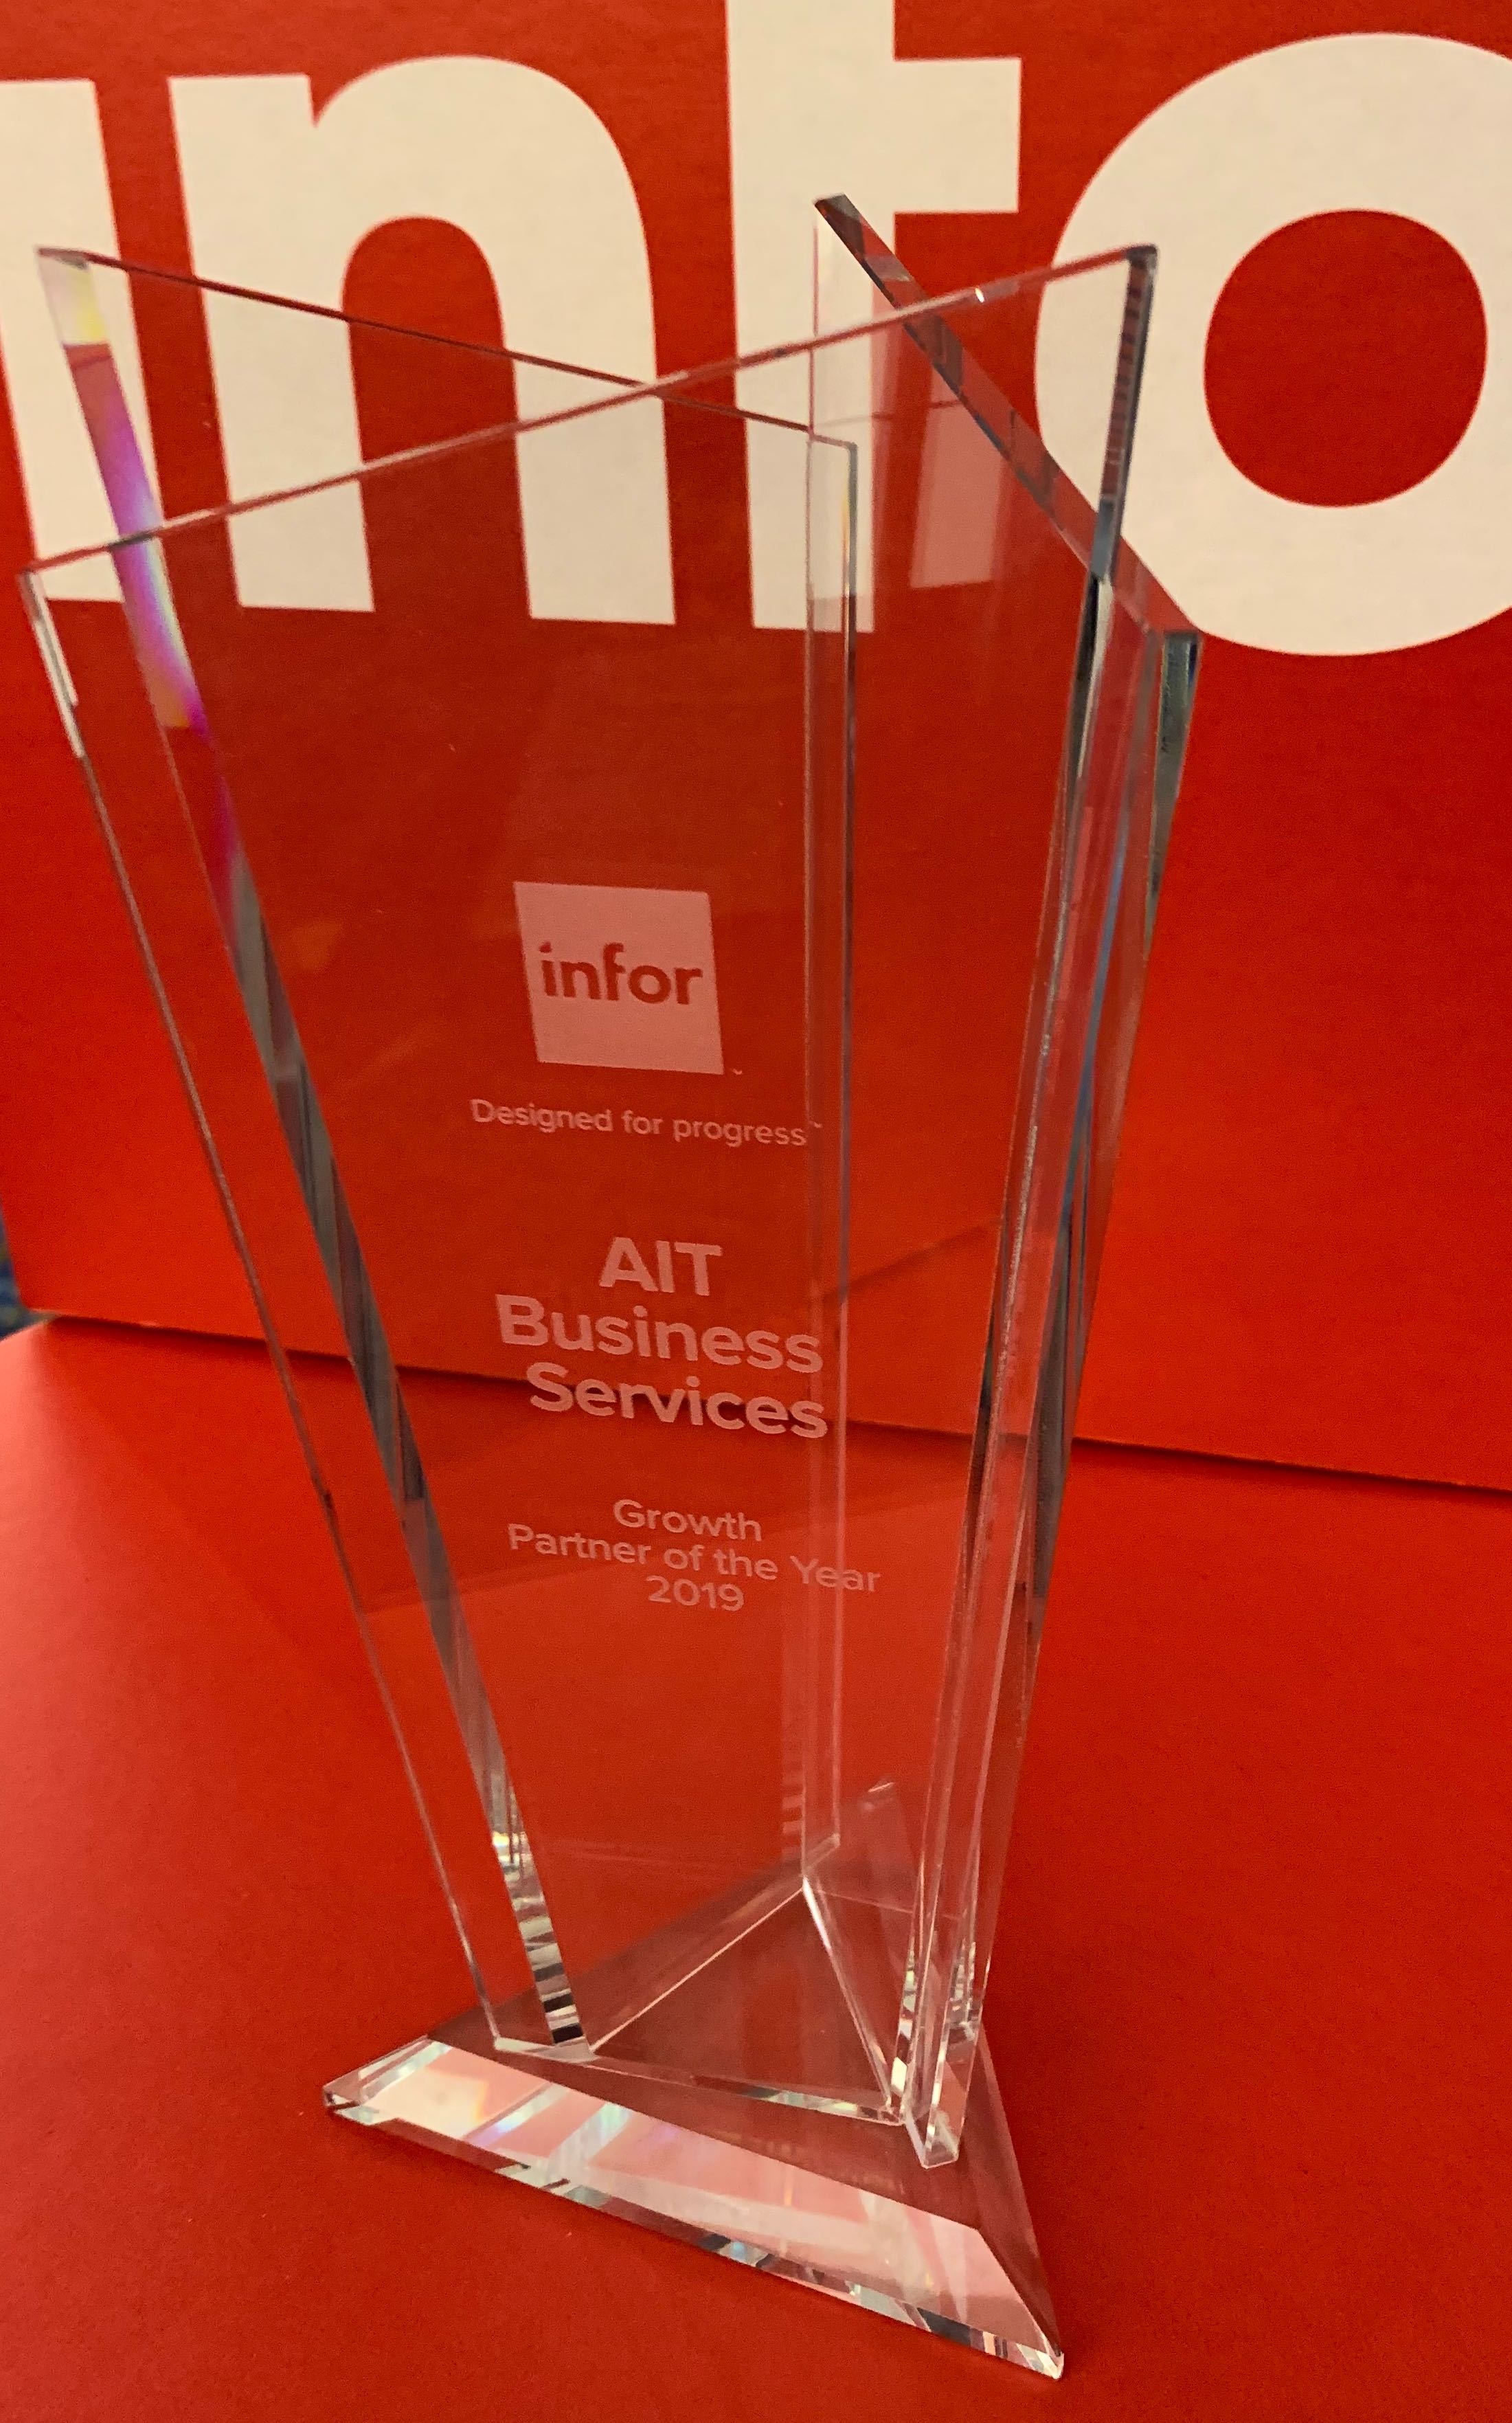 AIT Business Services Named Growth Partner of the Year 2019!